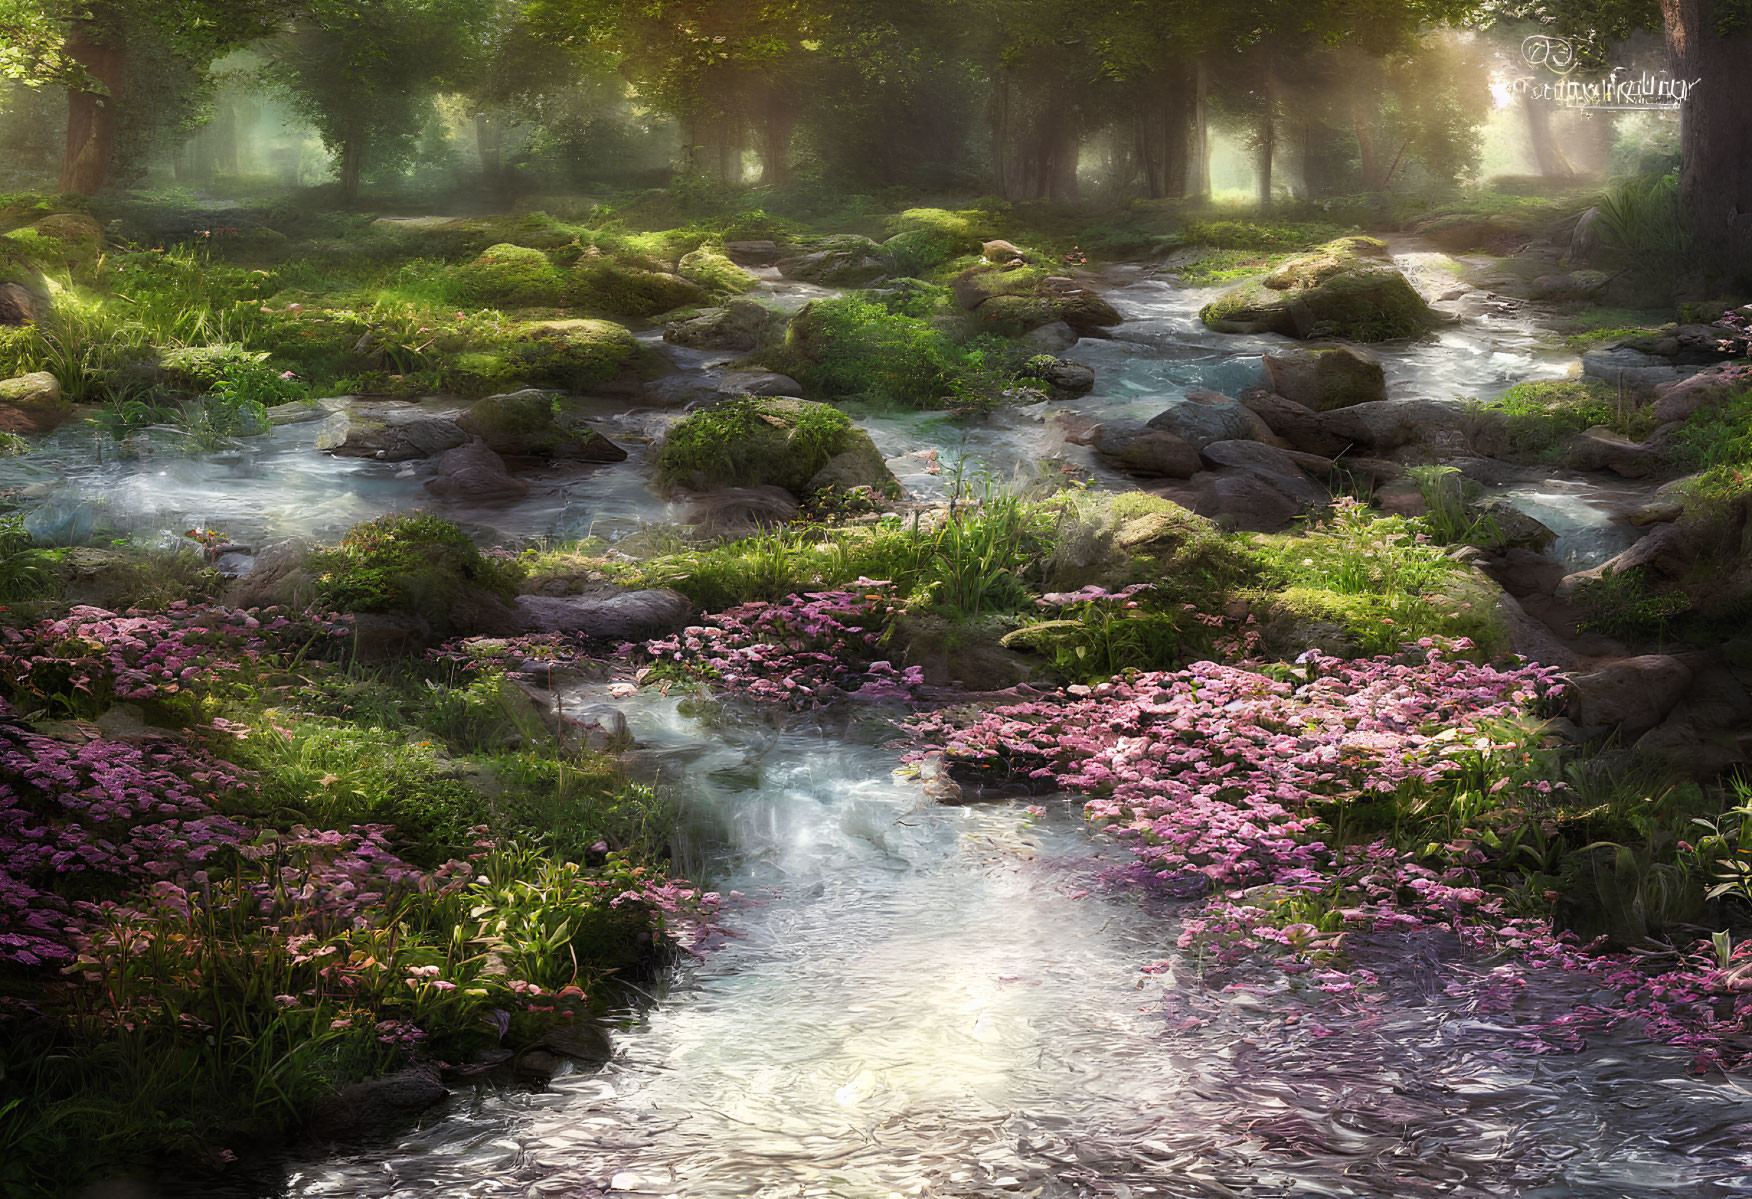 Tranquil forest stream with sunlight, moss-covered rocks, and pink flowers